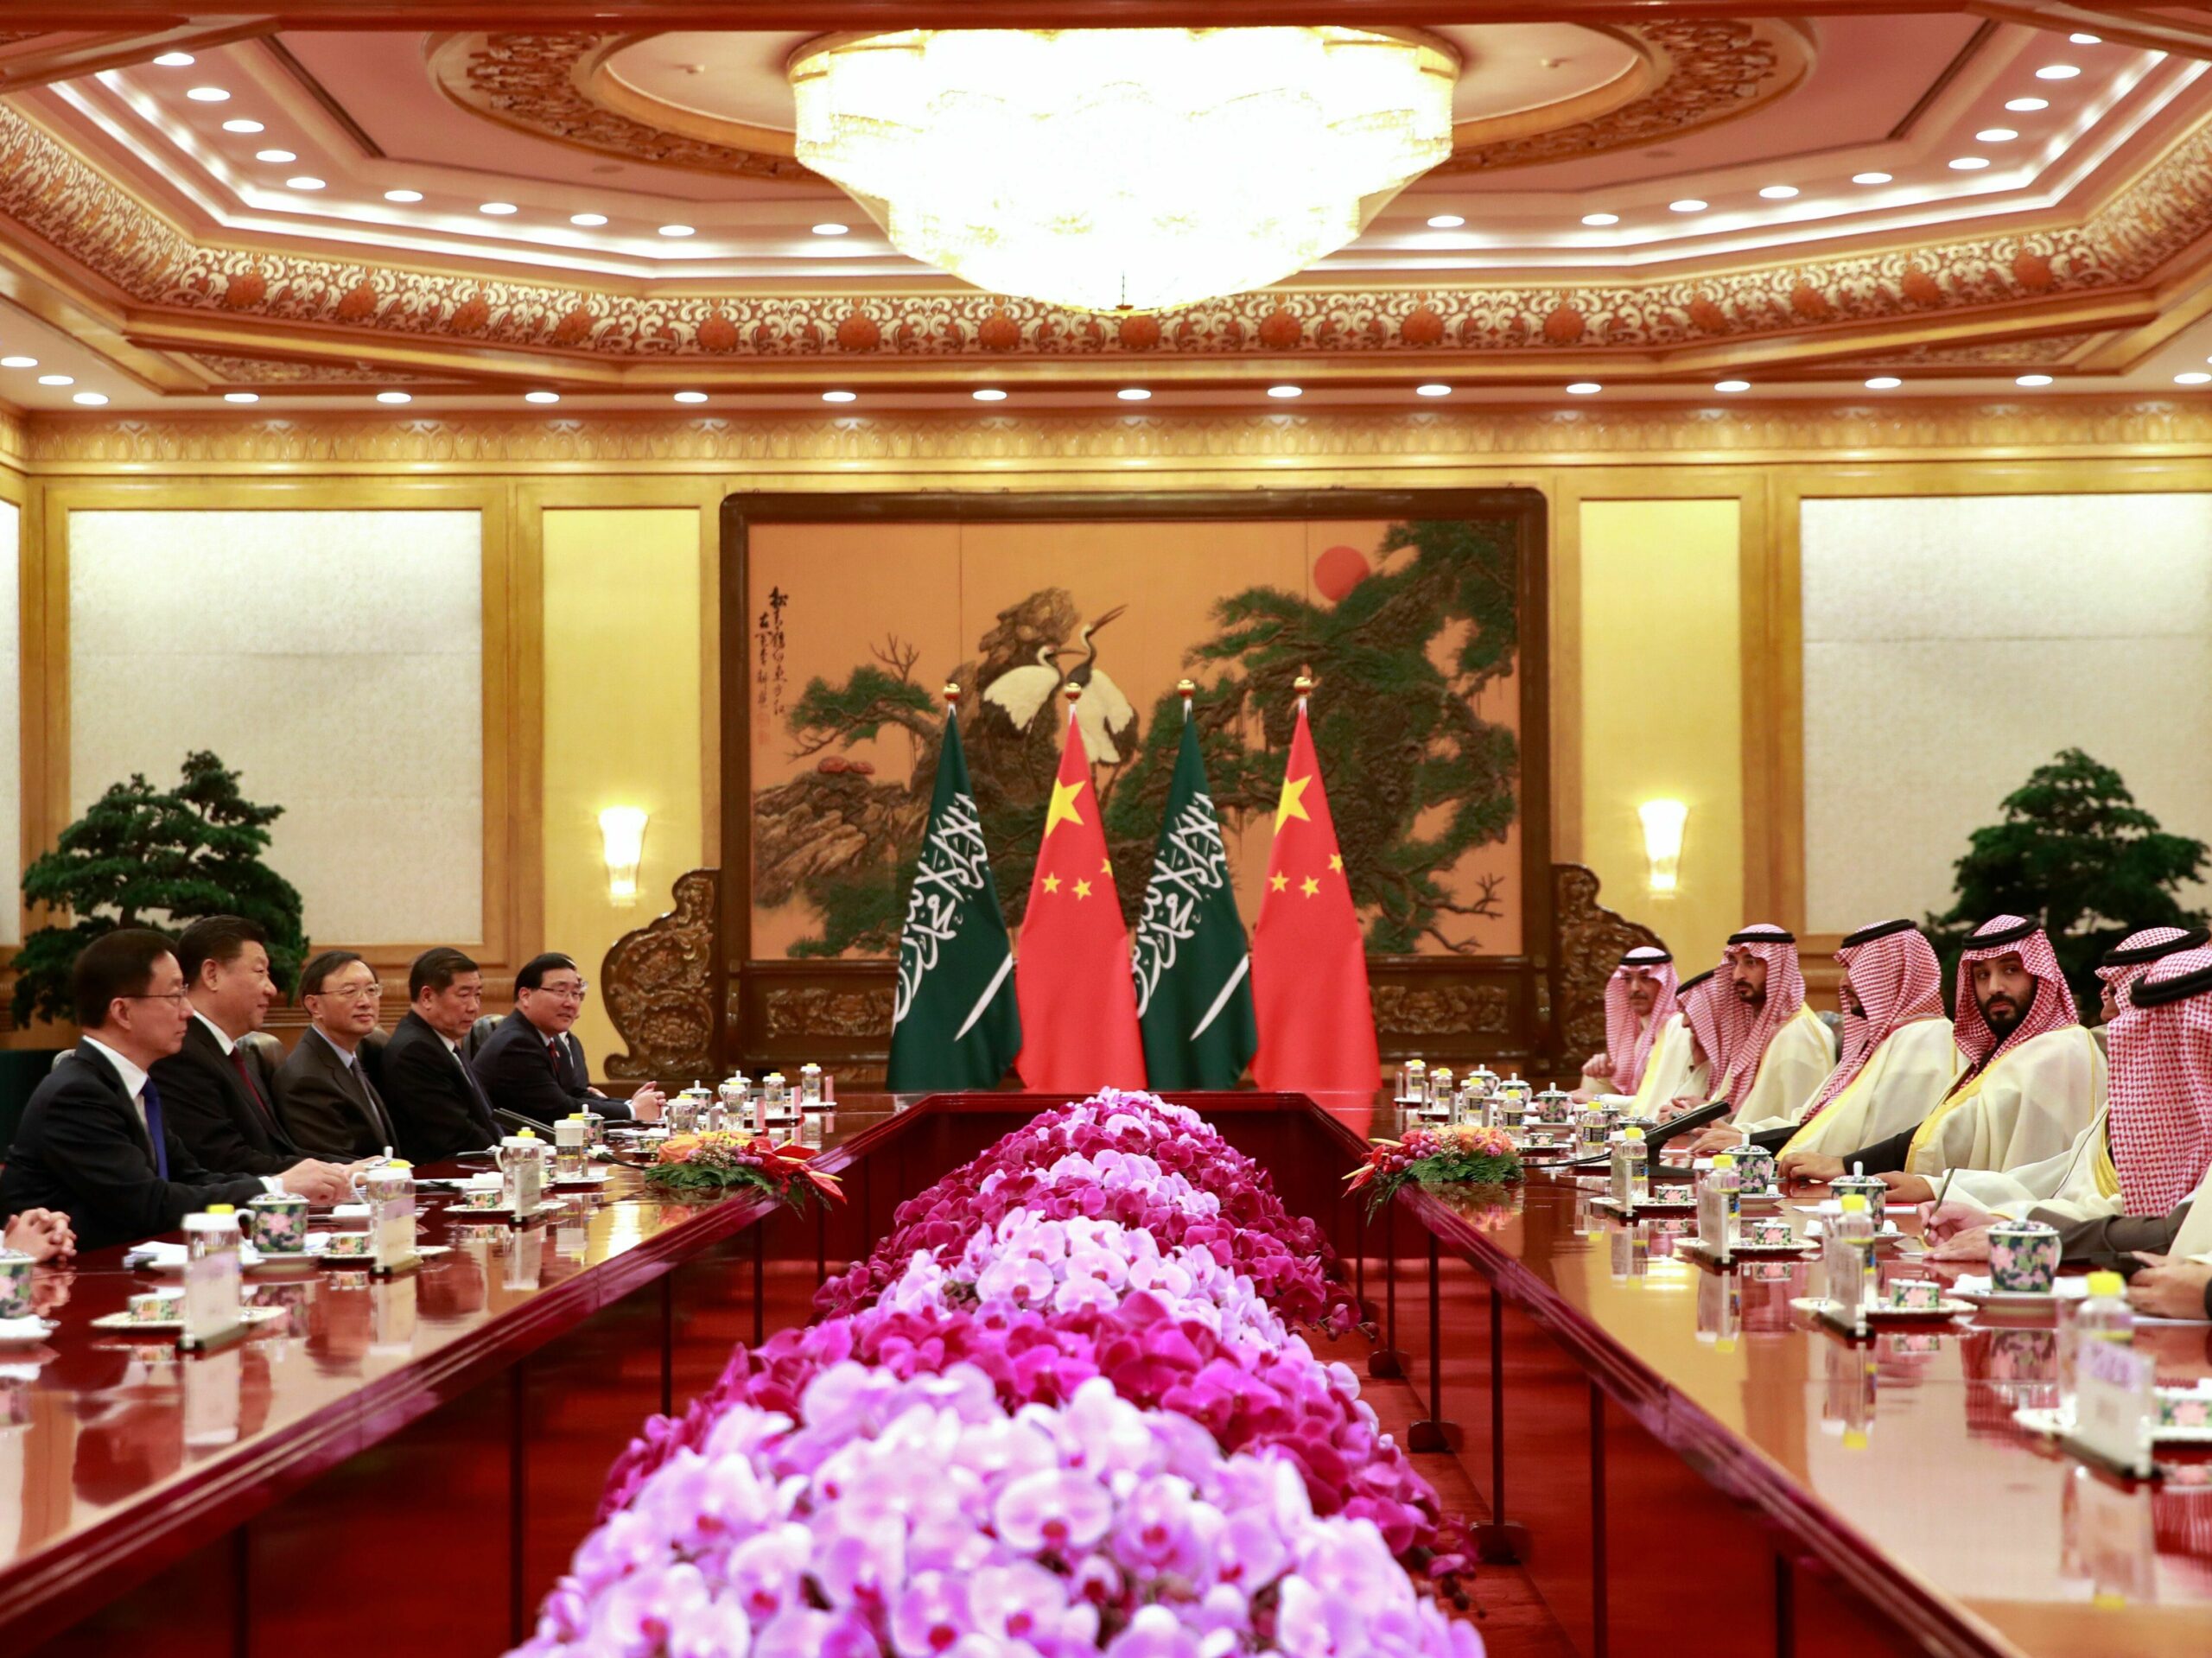 people in a meeting room with flowers on the table and China's flag displayed